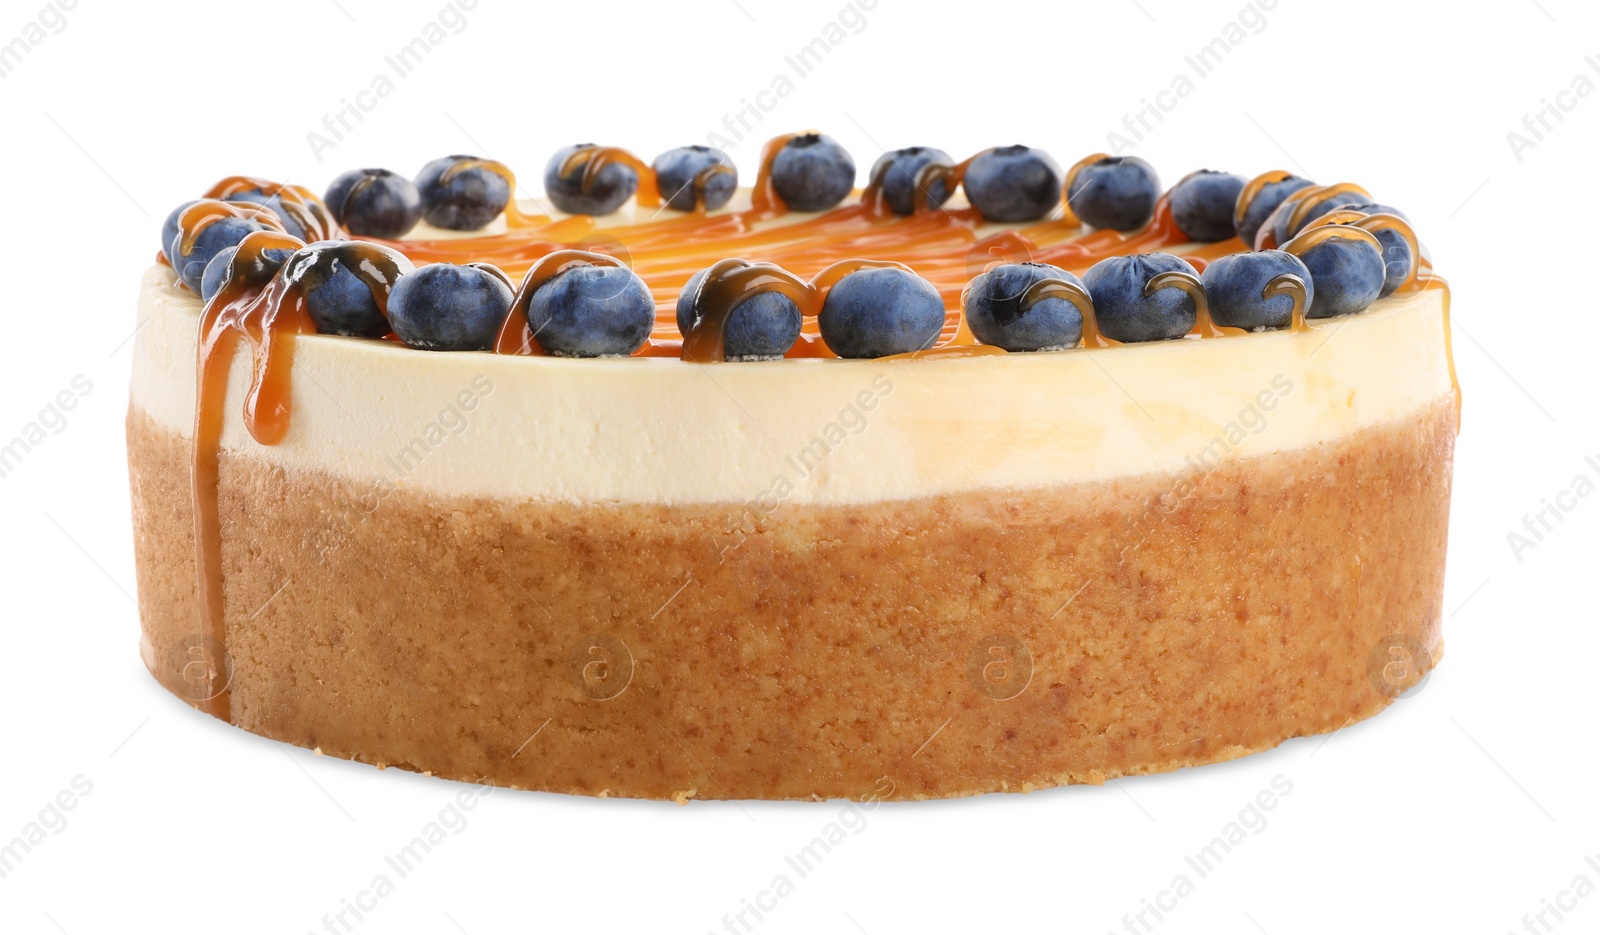 Photo of Delicious cheesecake with caramel and blueberries isolated on white